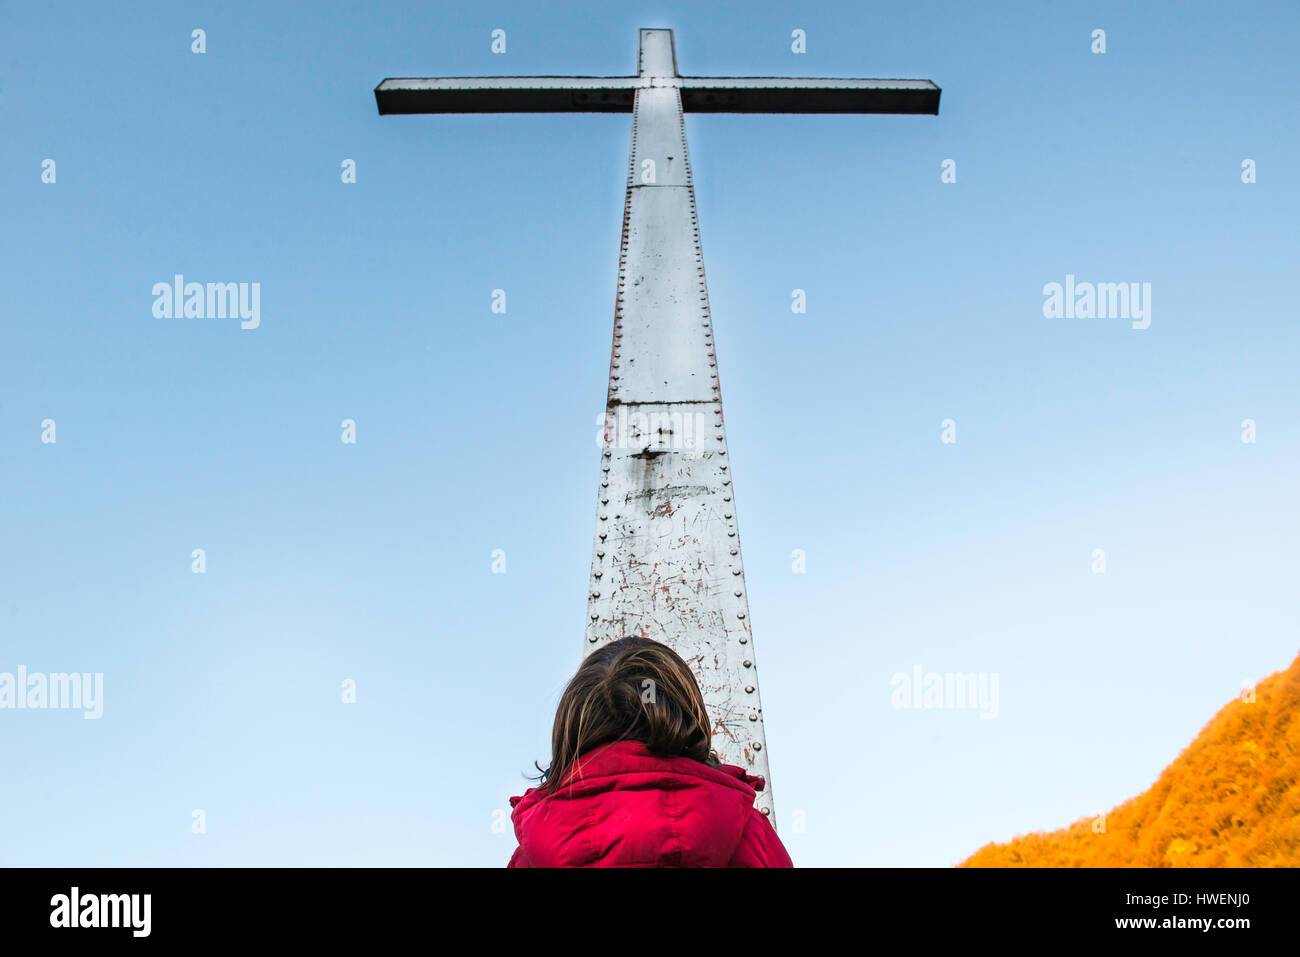 Rear view of boy looking up at towering cross and blue sky Stock Photo